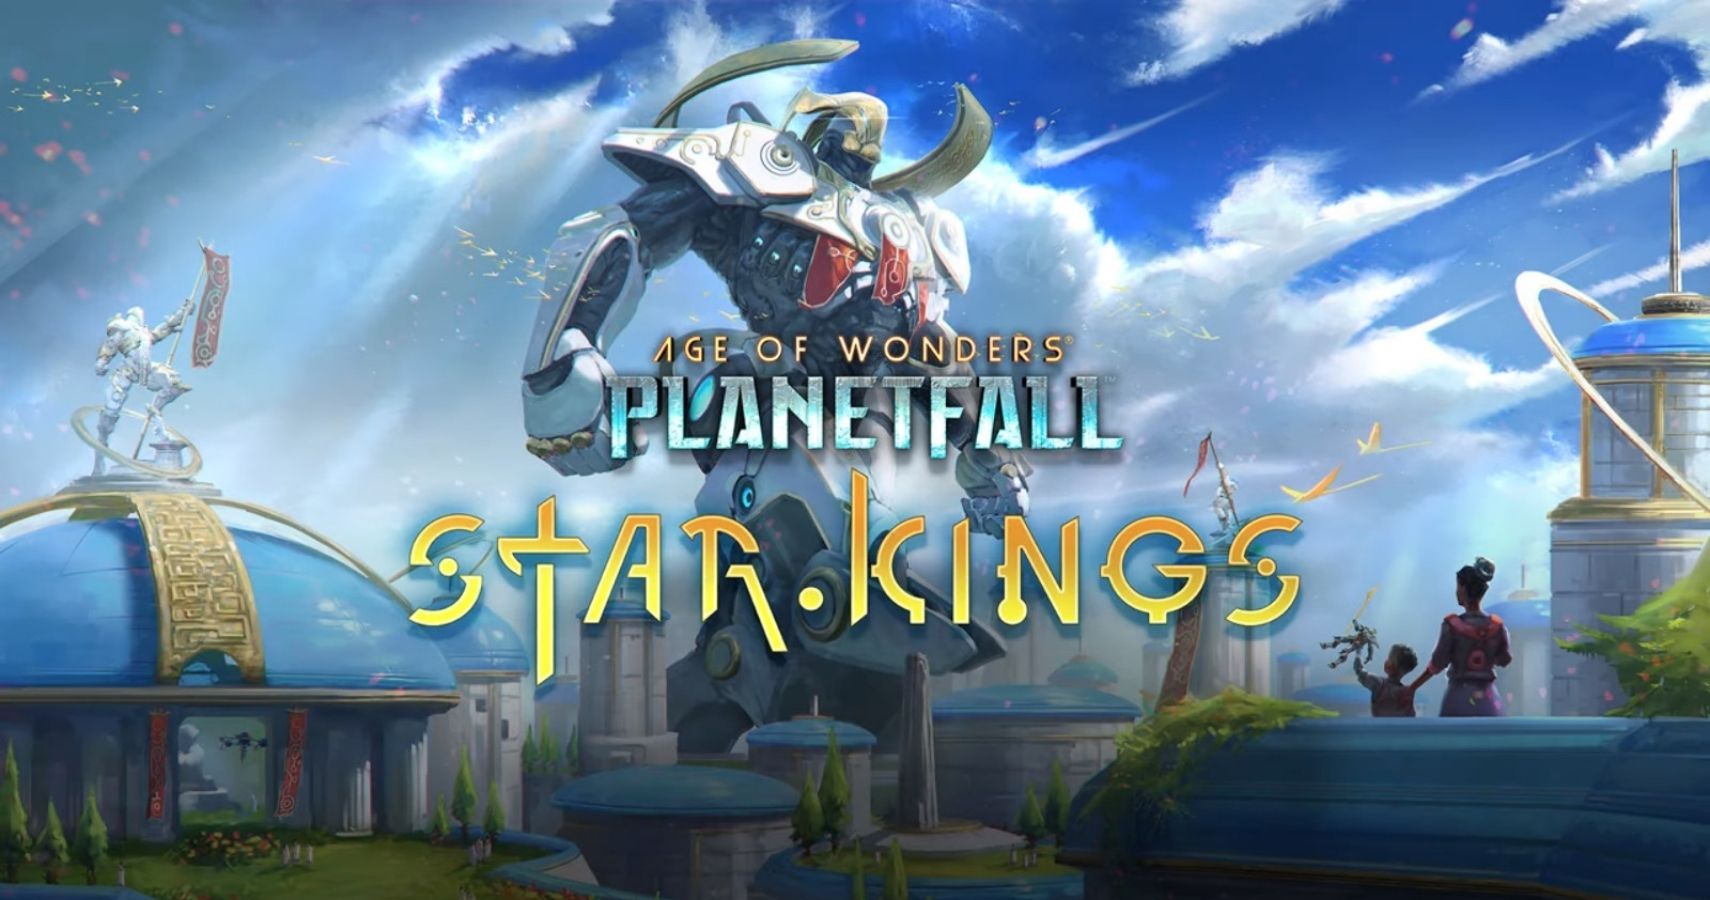 Afgift Par progressiv Rule The Galaxy As Star Kings With The New Age Of Wonders: Planetfall Update